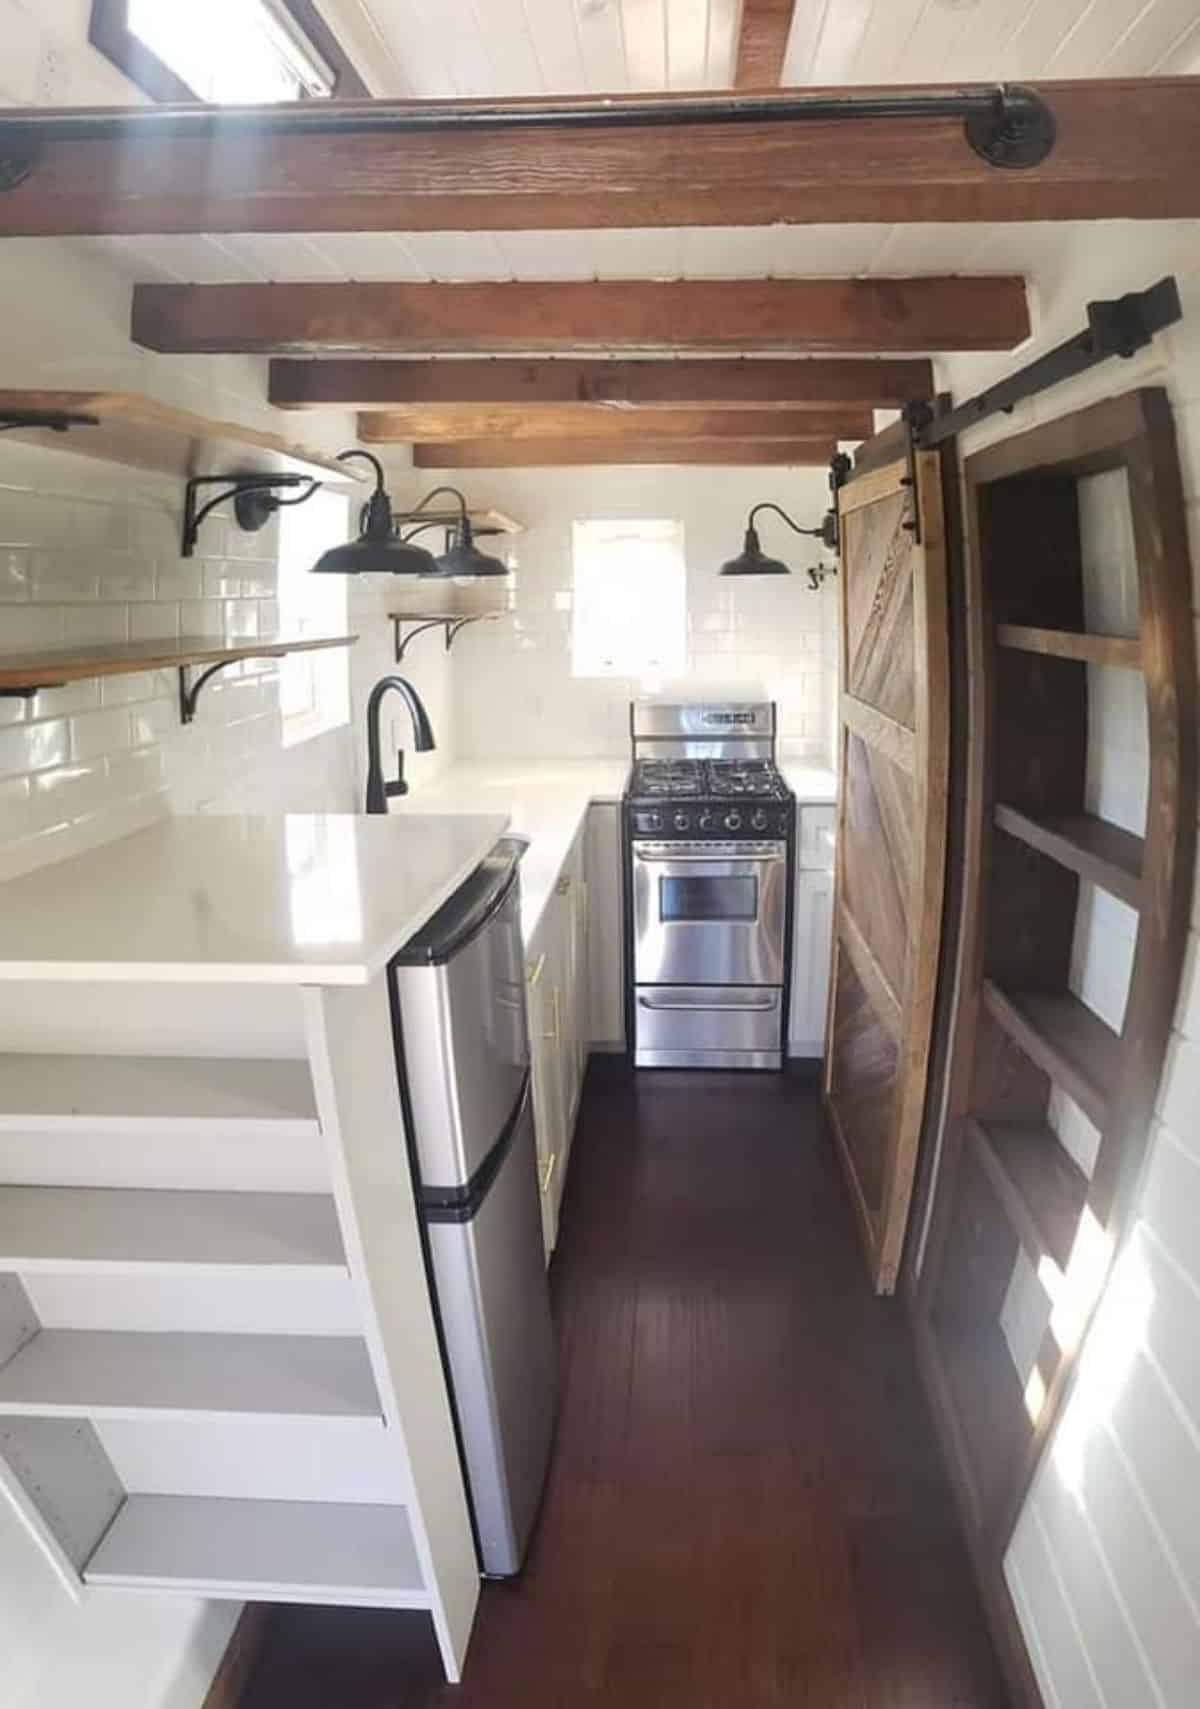 Kitchen area of tiny house with two lofts